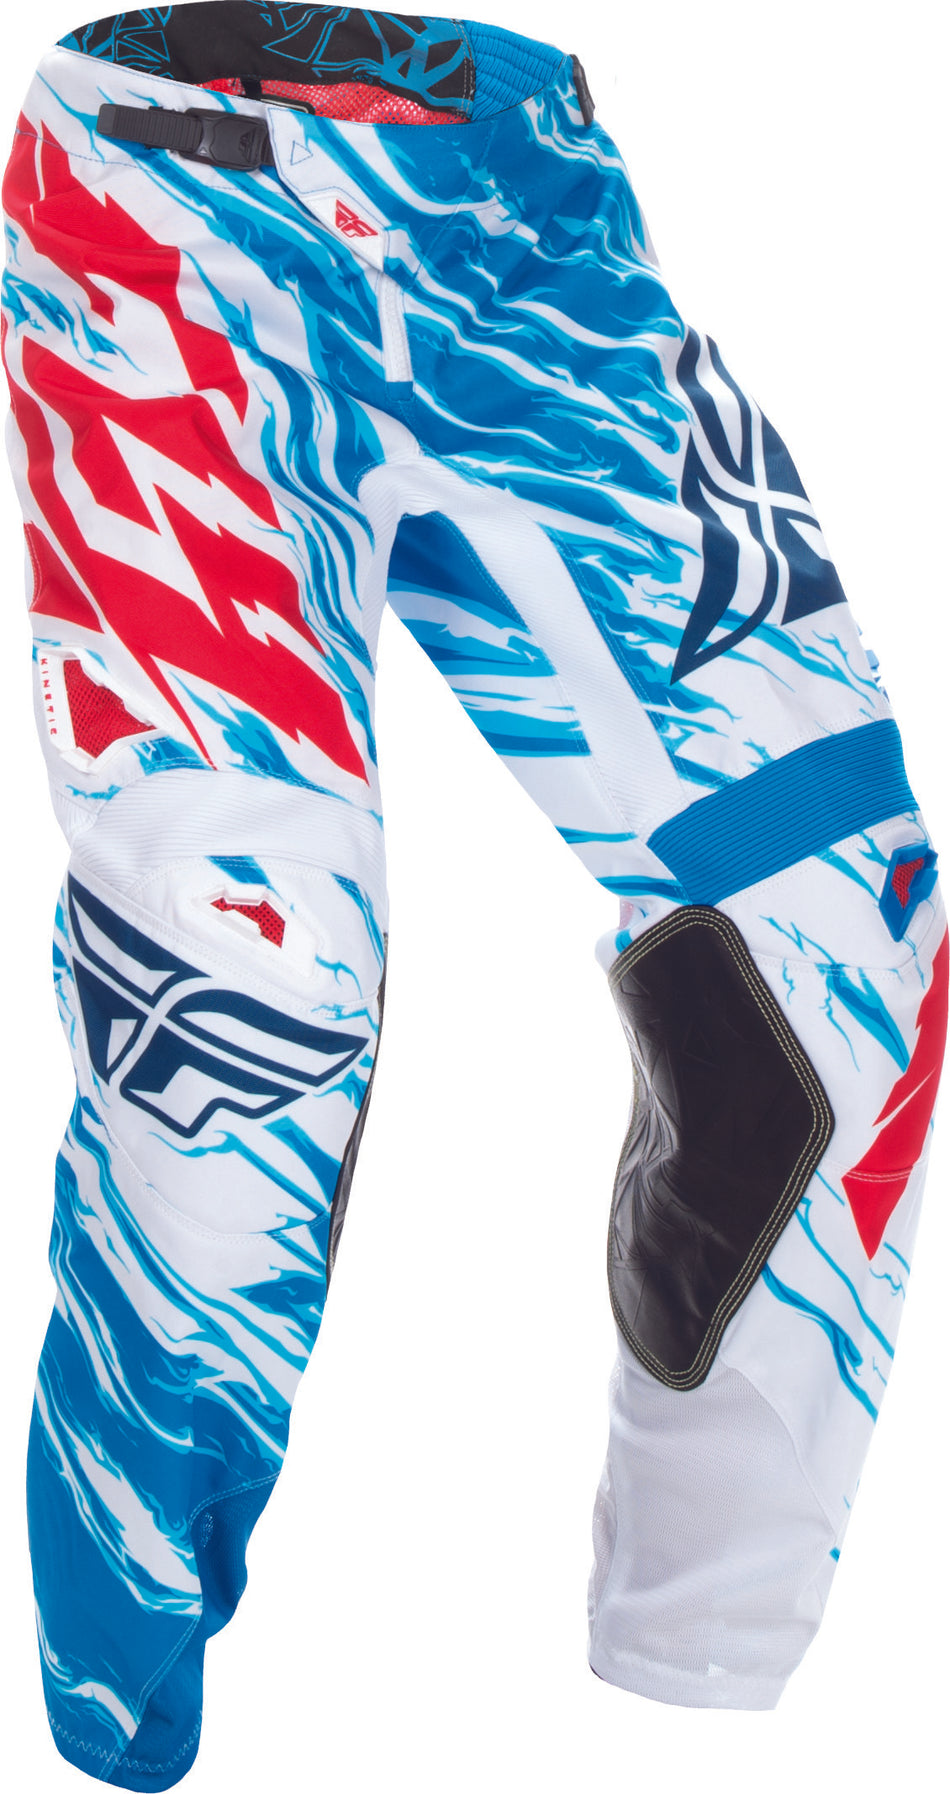 FLY RACING Kinetic Relapse Pant Red/White/Blue Sz 28s 370-43228S